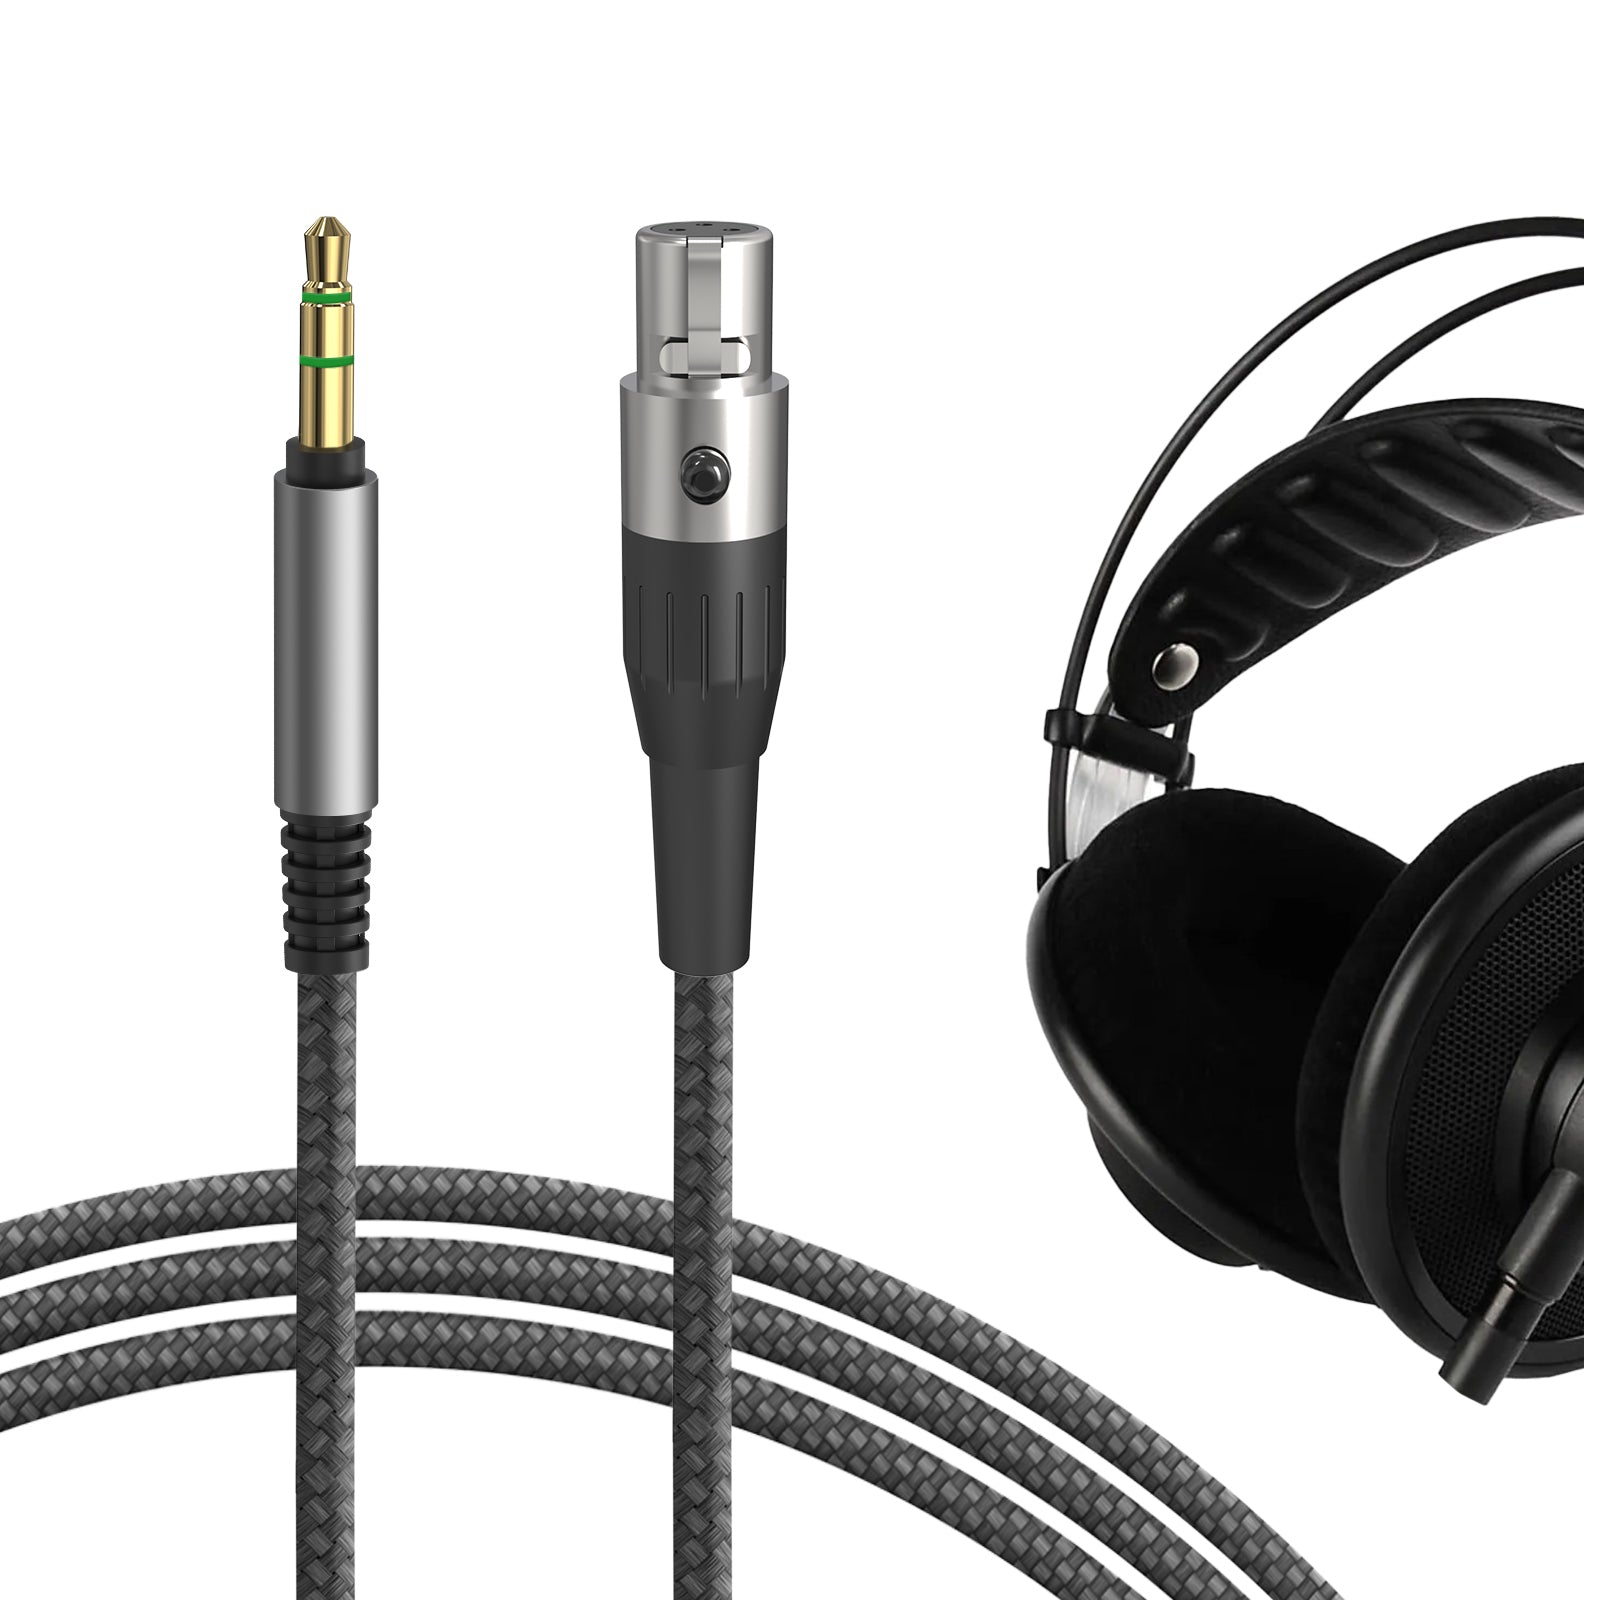 Geekria Audio Cable Compatible with AKG Q701, K702, K712, K271S, K271M